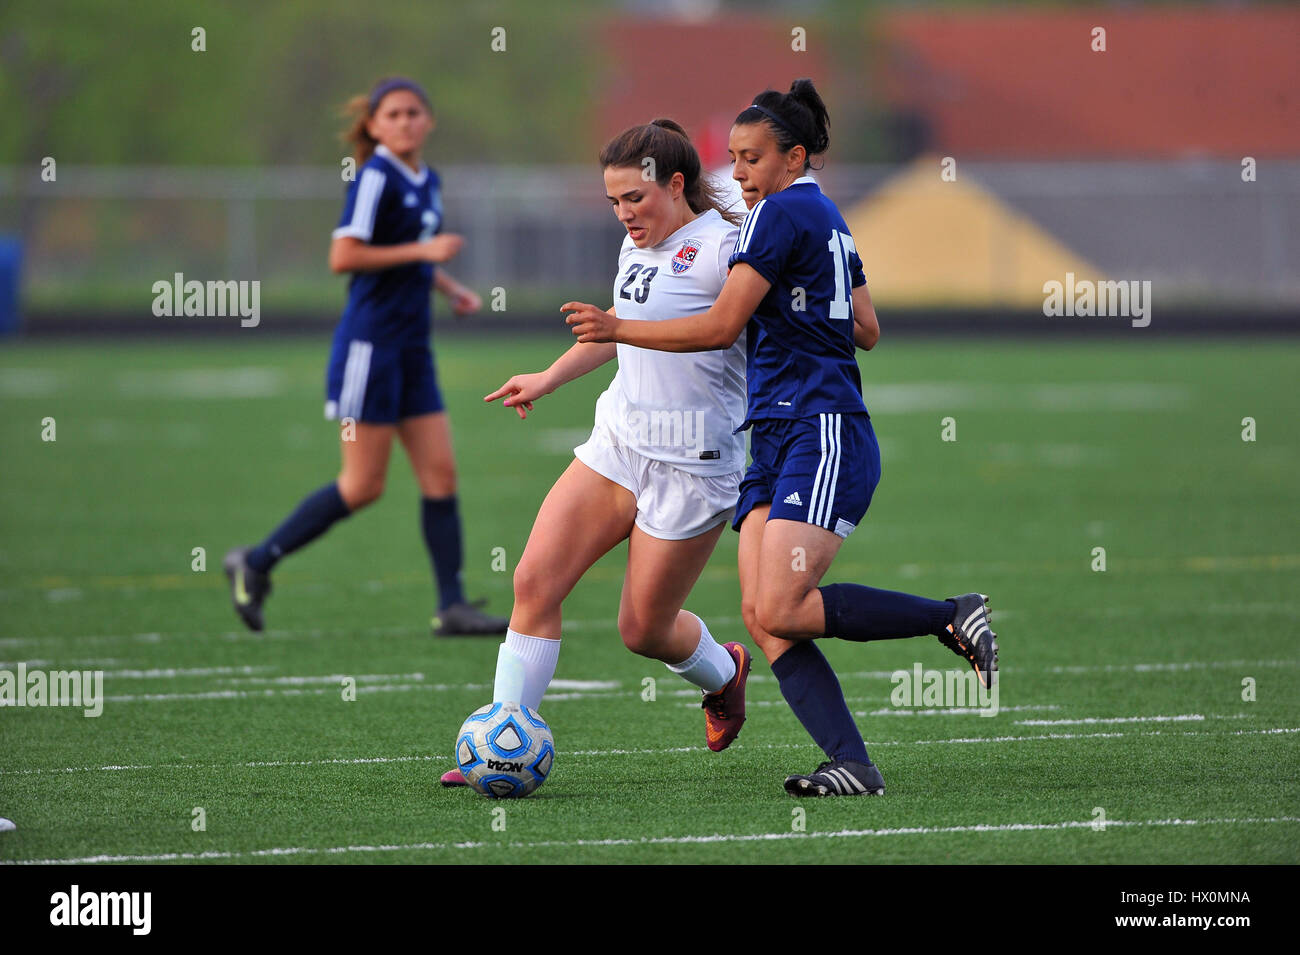 Opposing players battling for control of the ball.during a high school soccer match. USA. Stock Photo